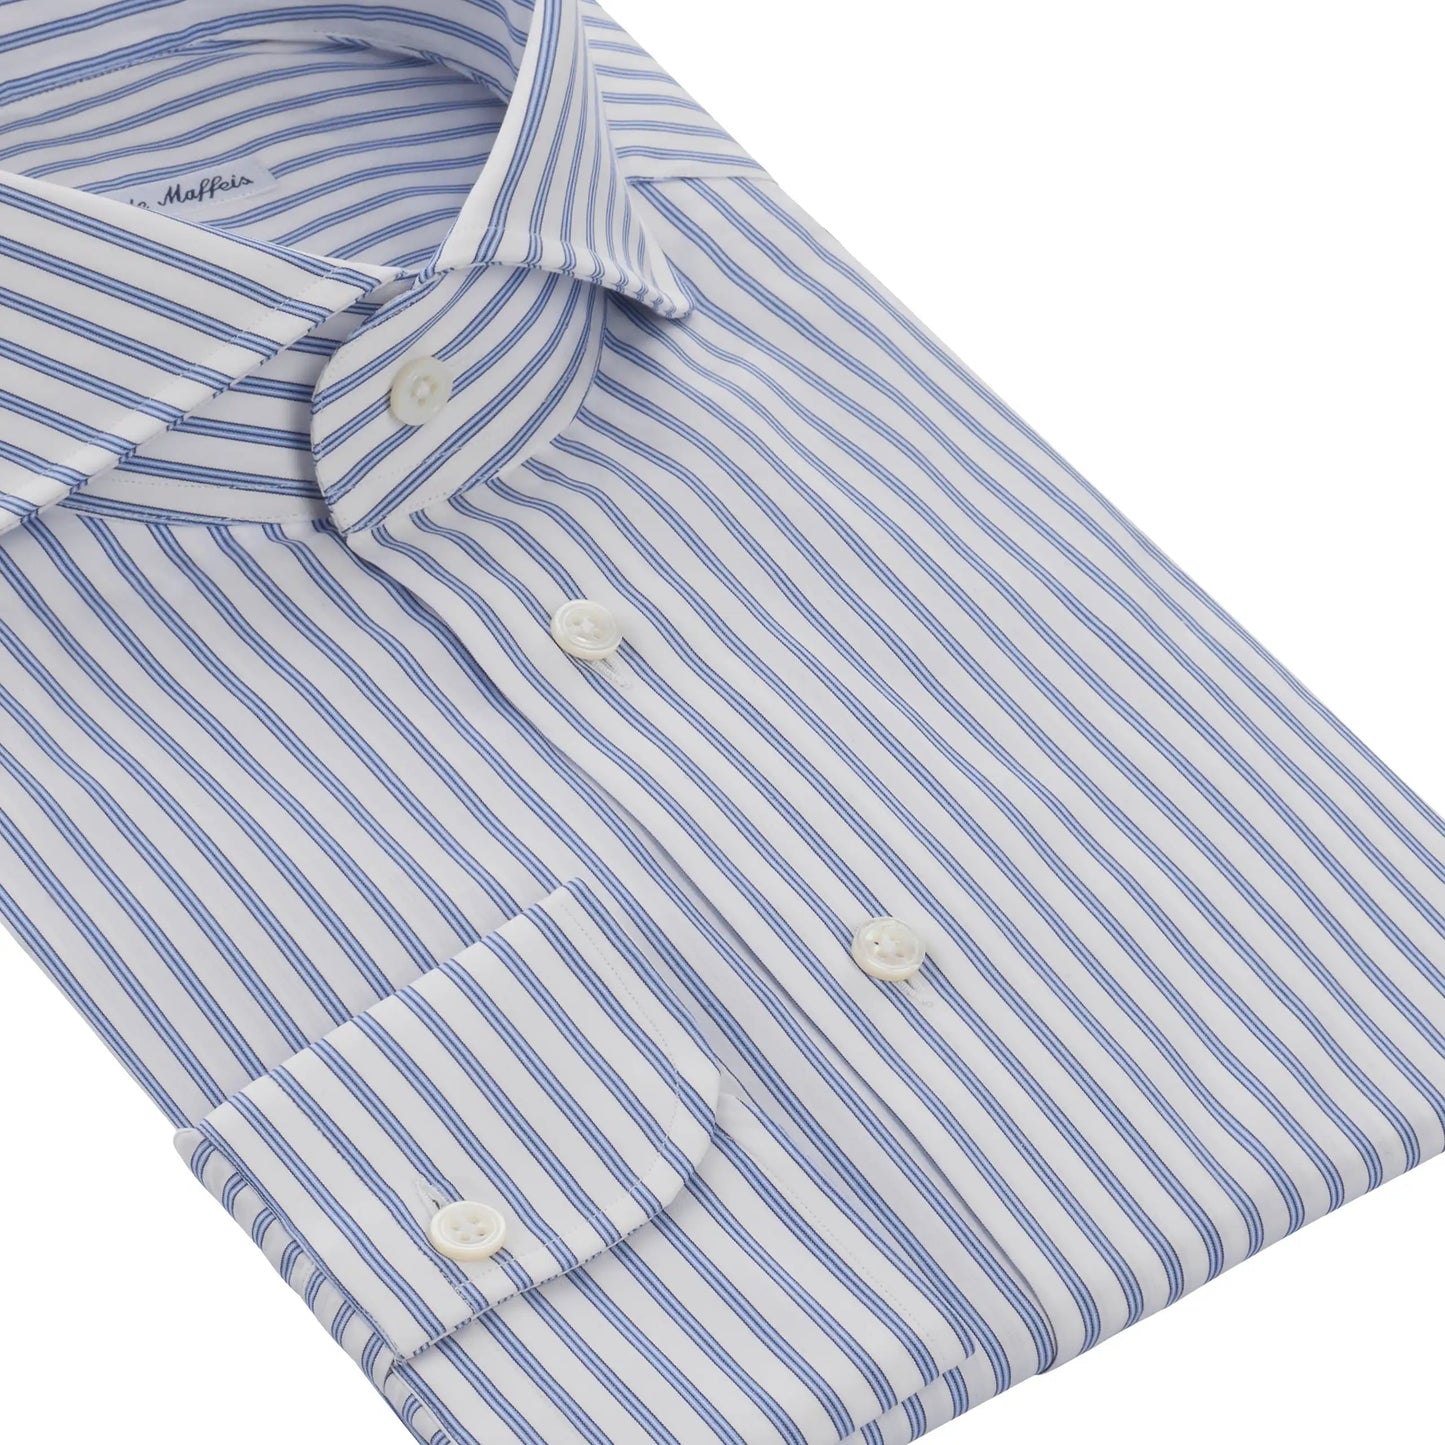 Emanuele Maffeis Striped Cotton Shirt in Blue and White - SARTALE